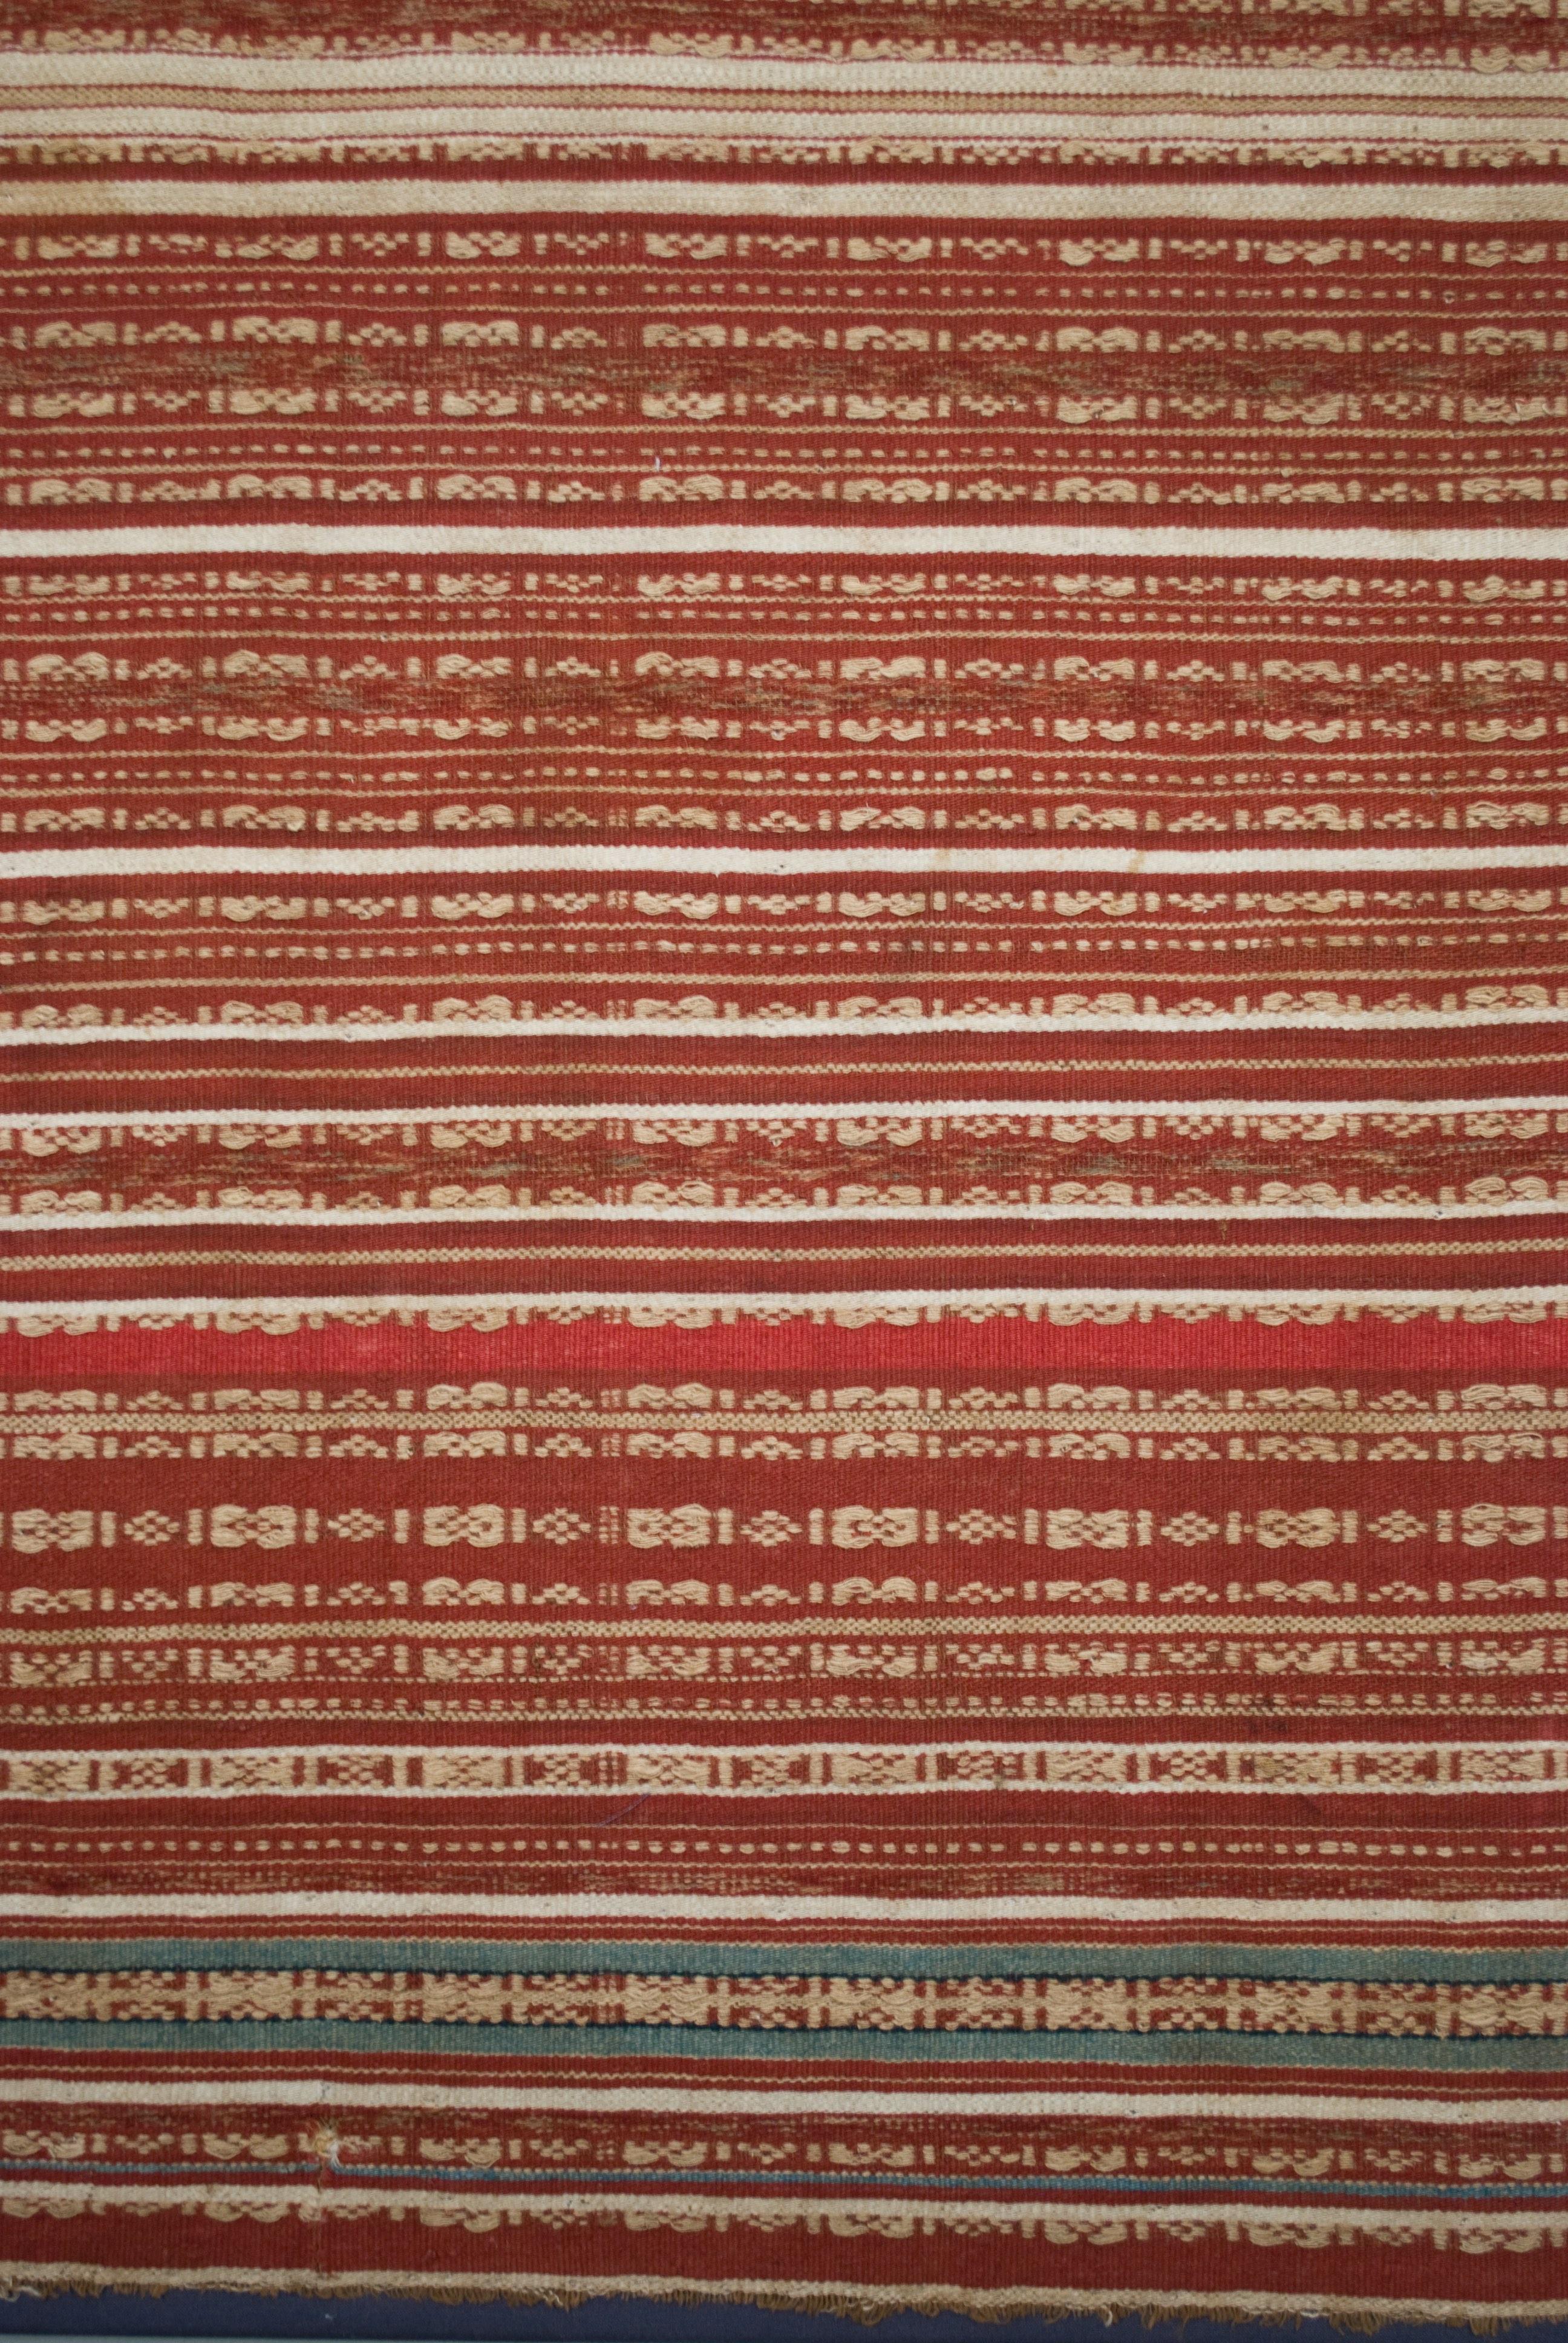 Late 19th century ceremonial cloth (bebali), Bali, Indonesia

Rare ceremonial cloth used in a variety of ‘rites of passage’ ceremonies among the Balinese people. A few small indigenous repairs, but in otherwise remarkable condition for its age.